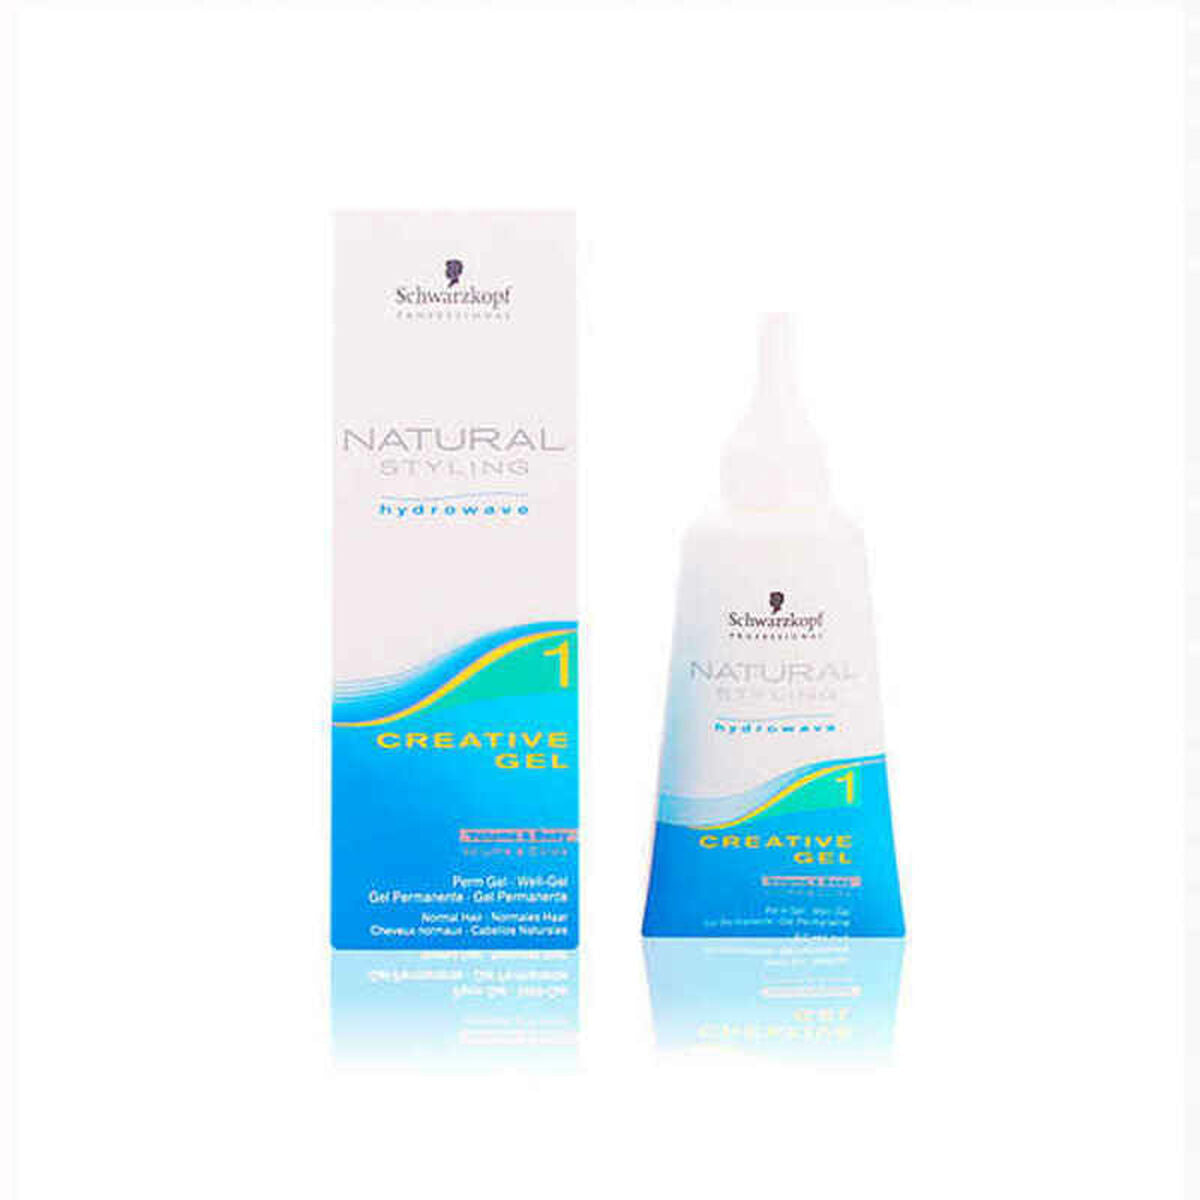 Shaping Gel Natural Styling Hydrowave Schwarzkopf Natural Styling (50 ml)